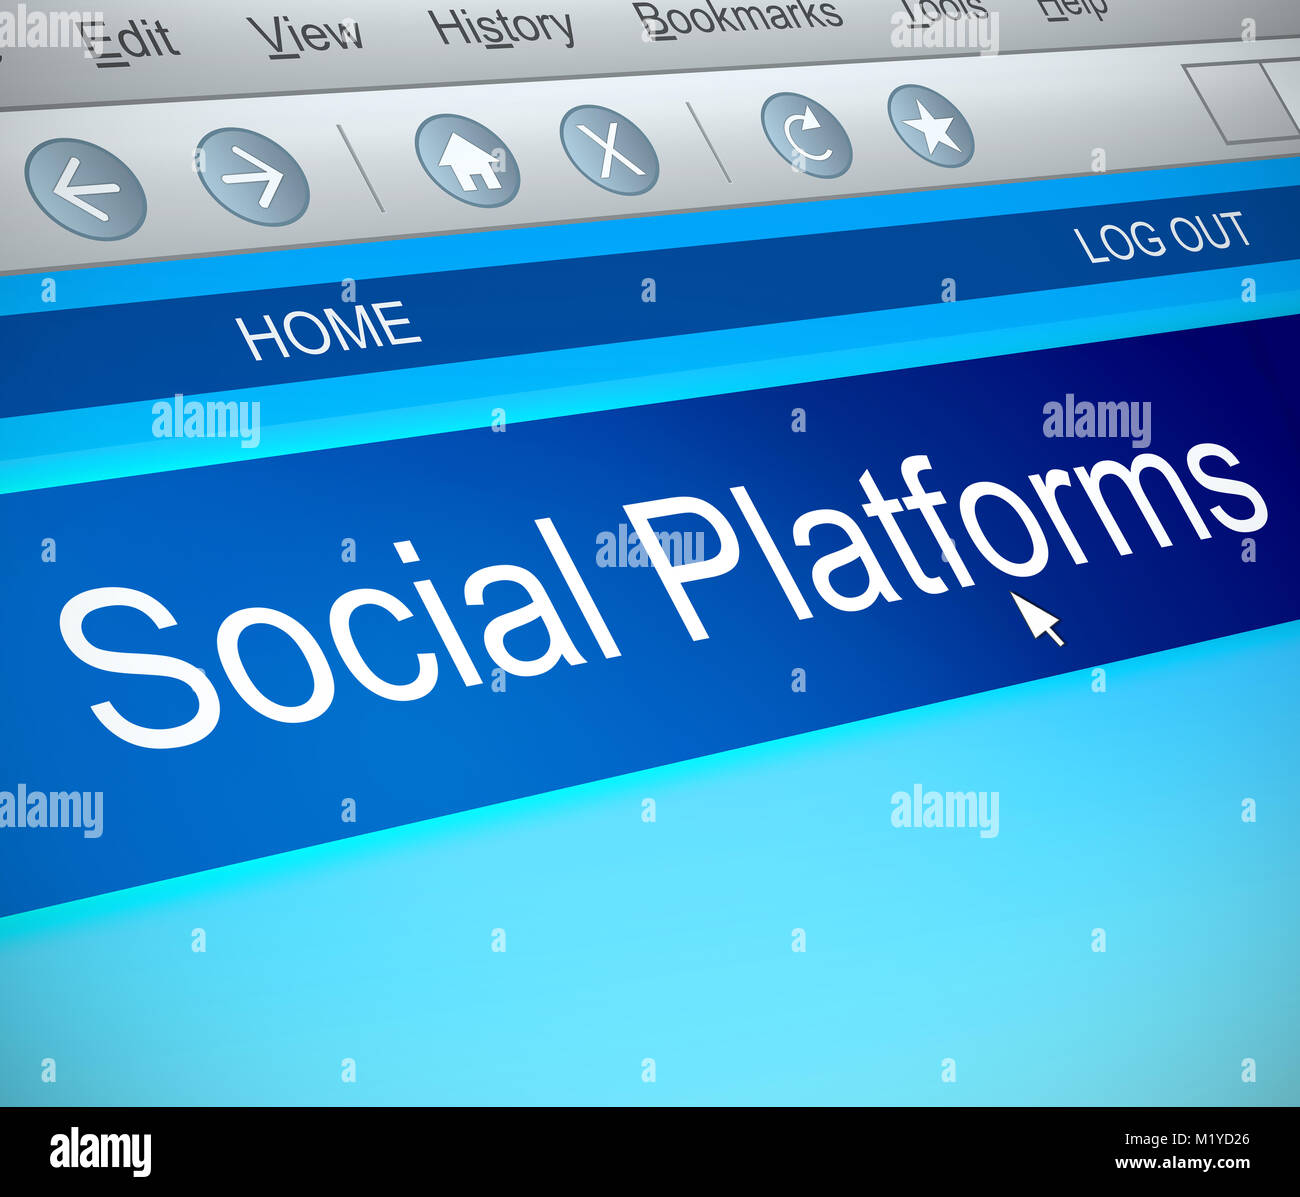 3d Illustration depicting a computer screen capture with a social platforms concept. Stock Photo